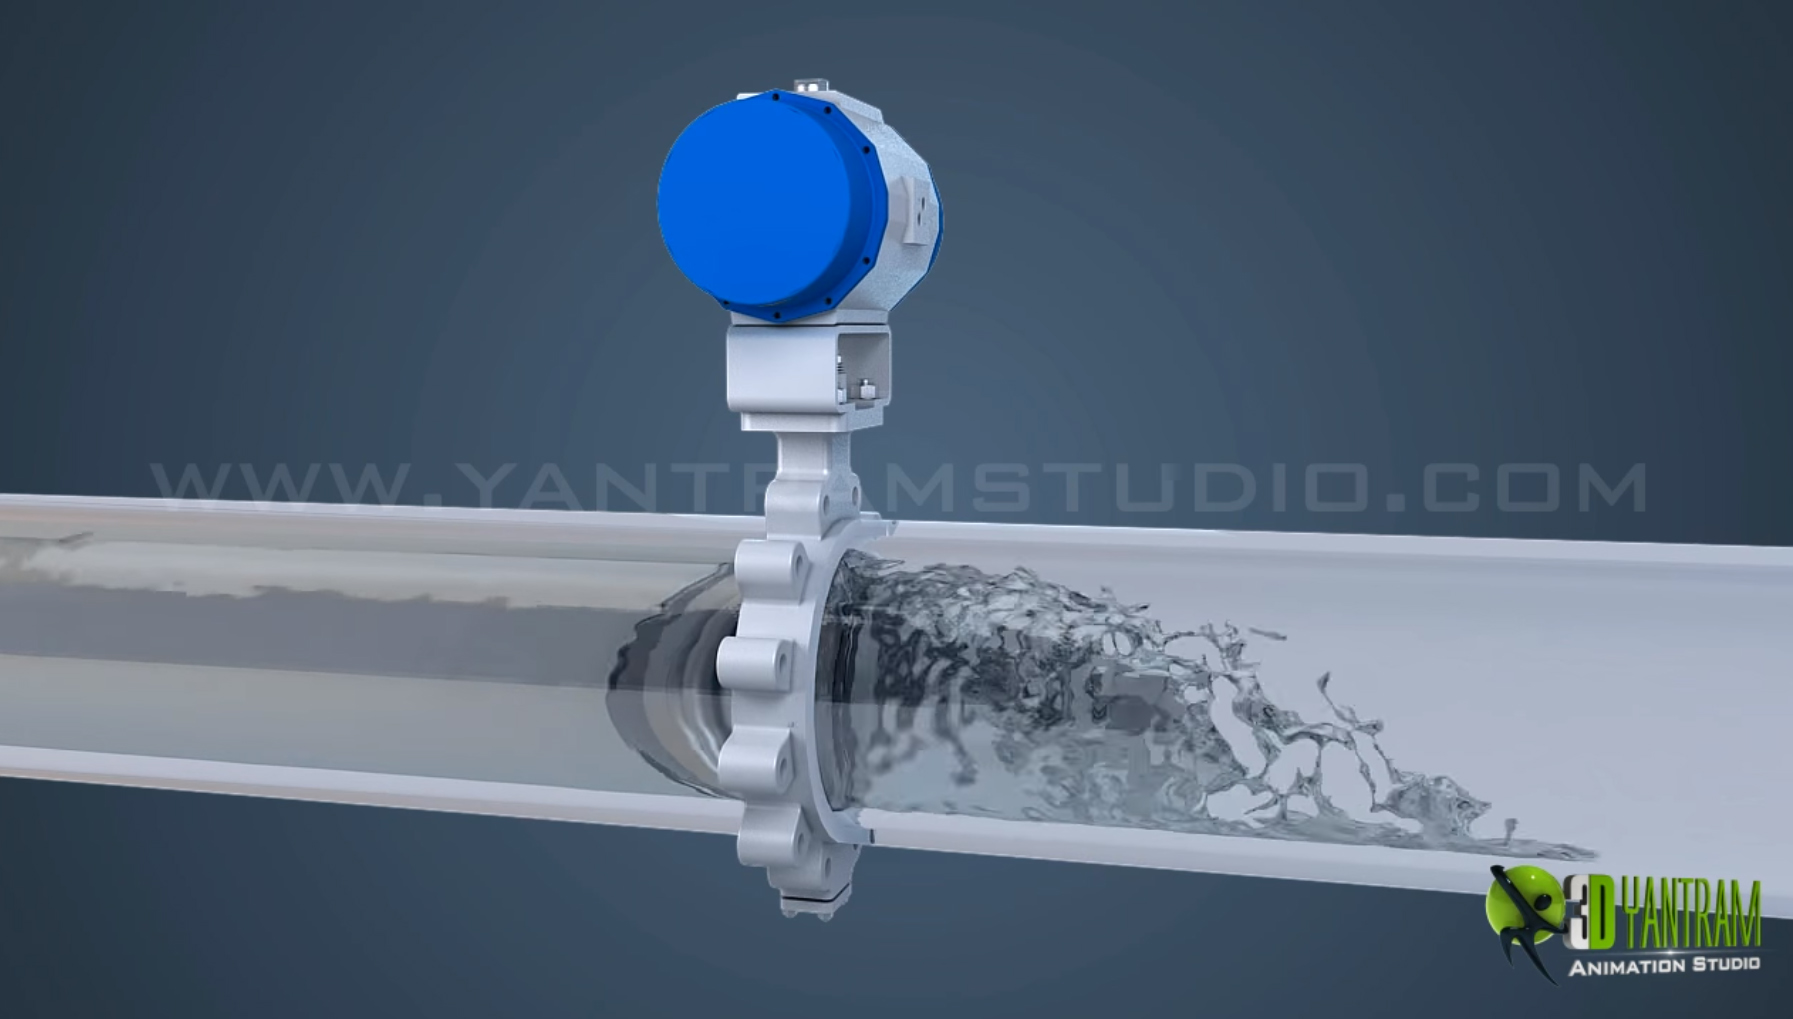 3D Product Modeling - 3D Product Visualization and Product Rendering Animation.jpg -  by Yantramarchitecturaldesignstudio